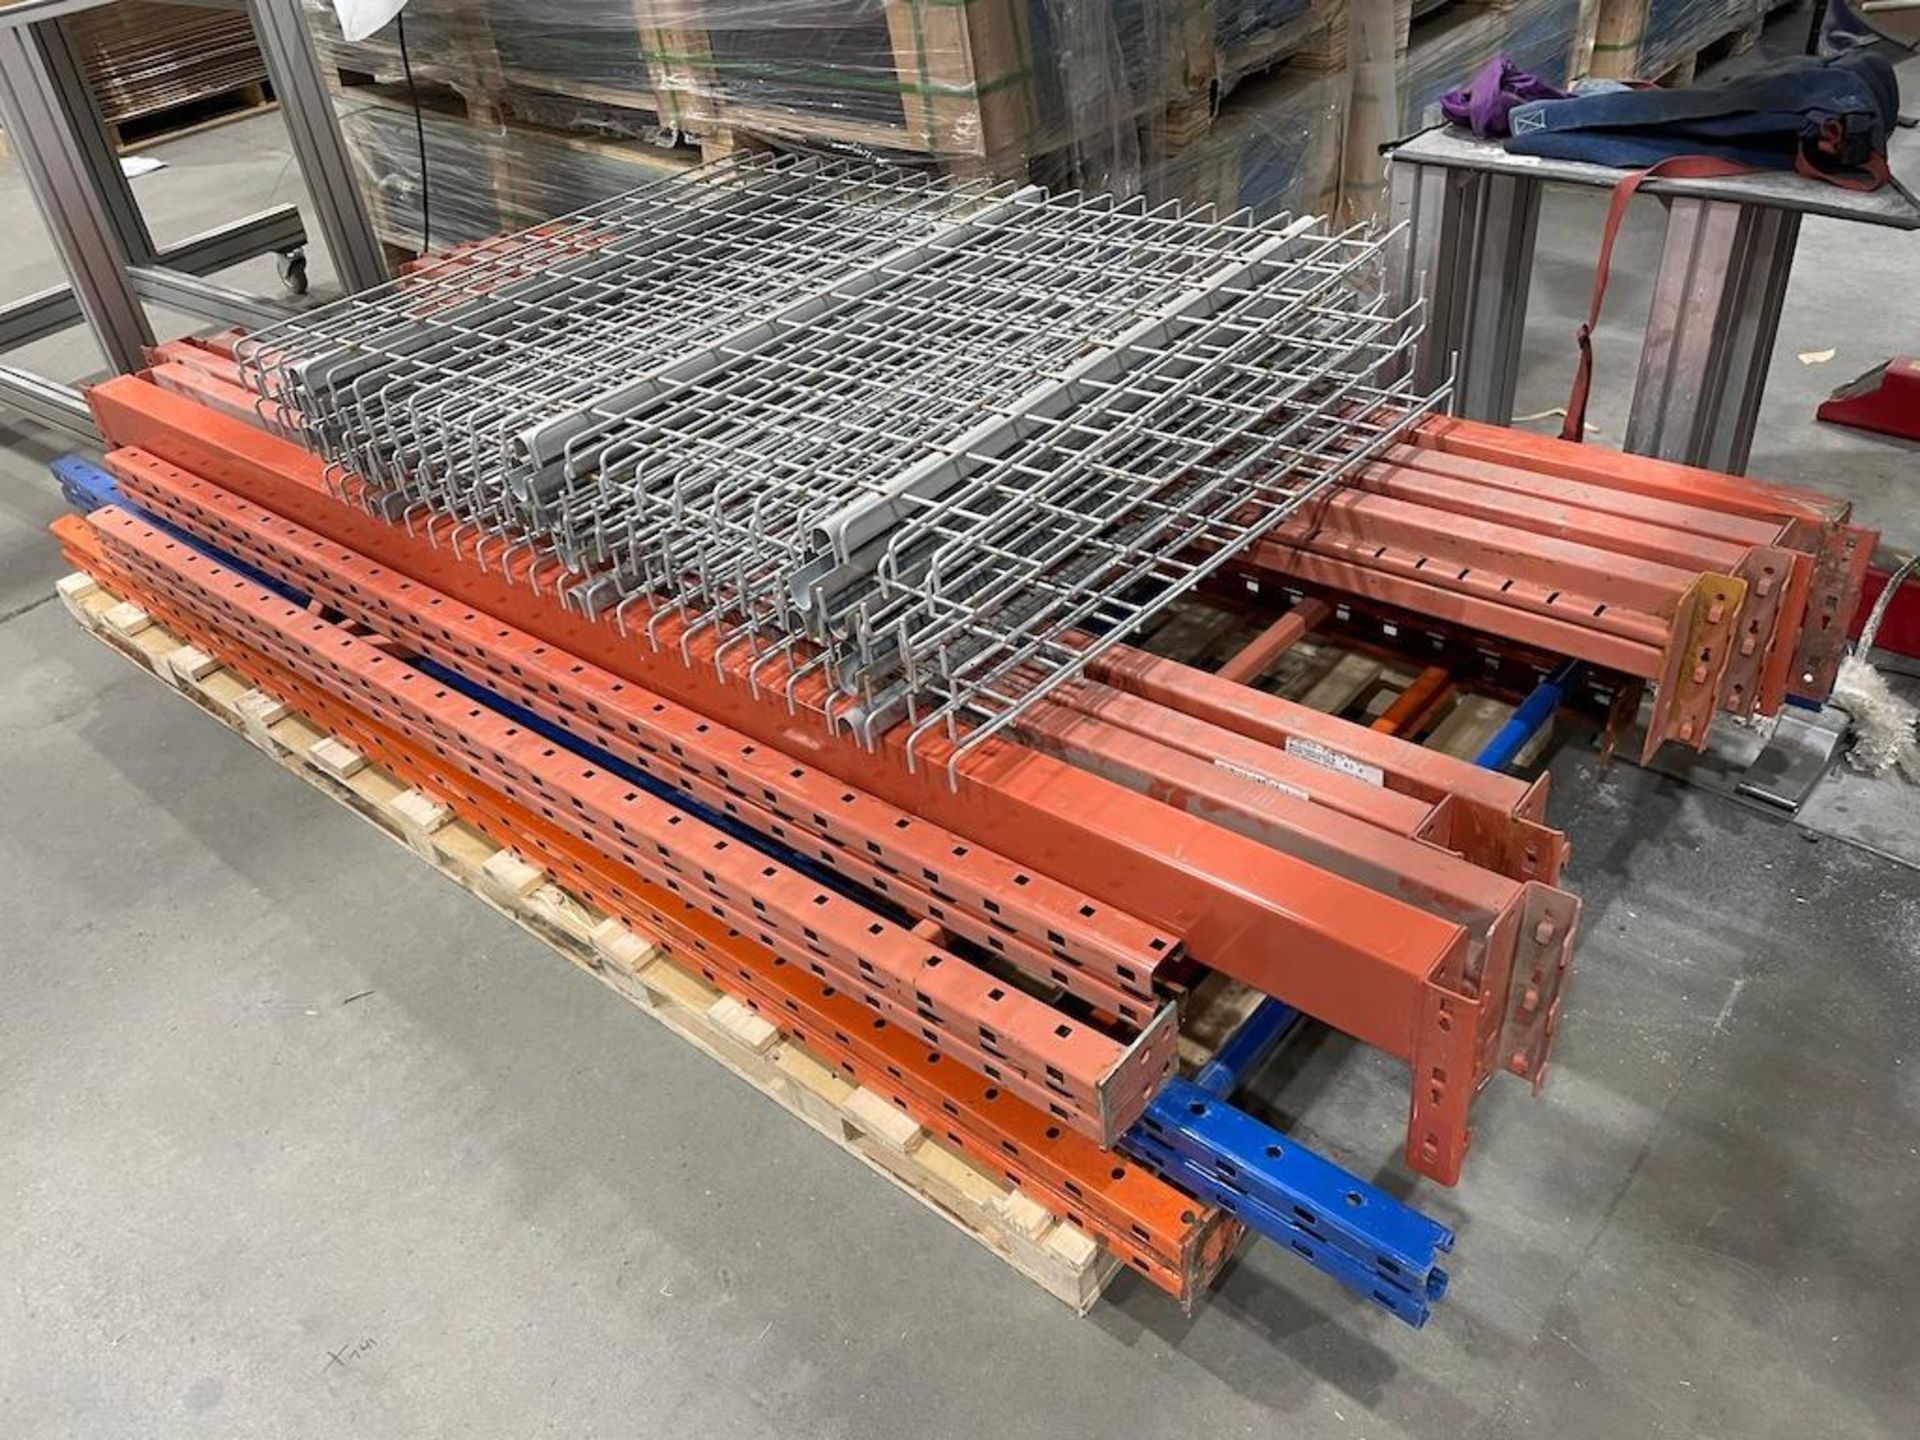 LOT ASSORTED ADJUSTABLE PALLET RACKING THROUGHOUT, APPROXIMATELY 47 SECTIONS [TROIS RIVIERES]*PLEASE - Image 16 of 16